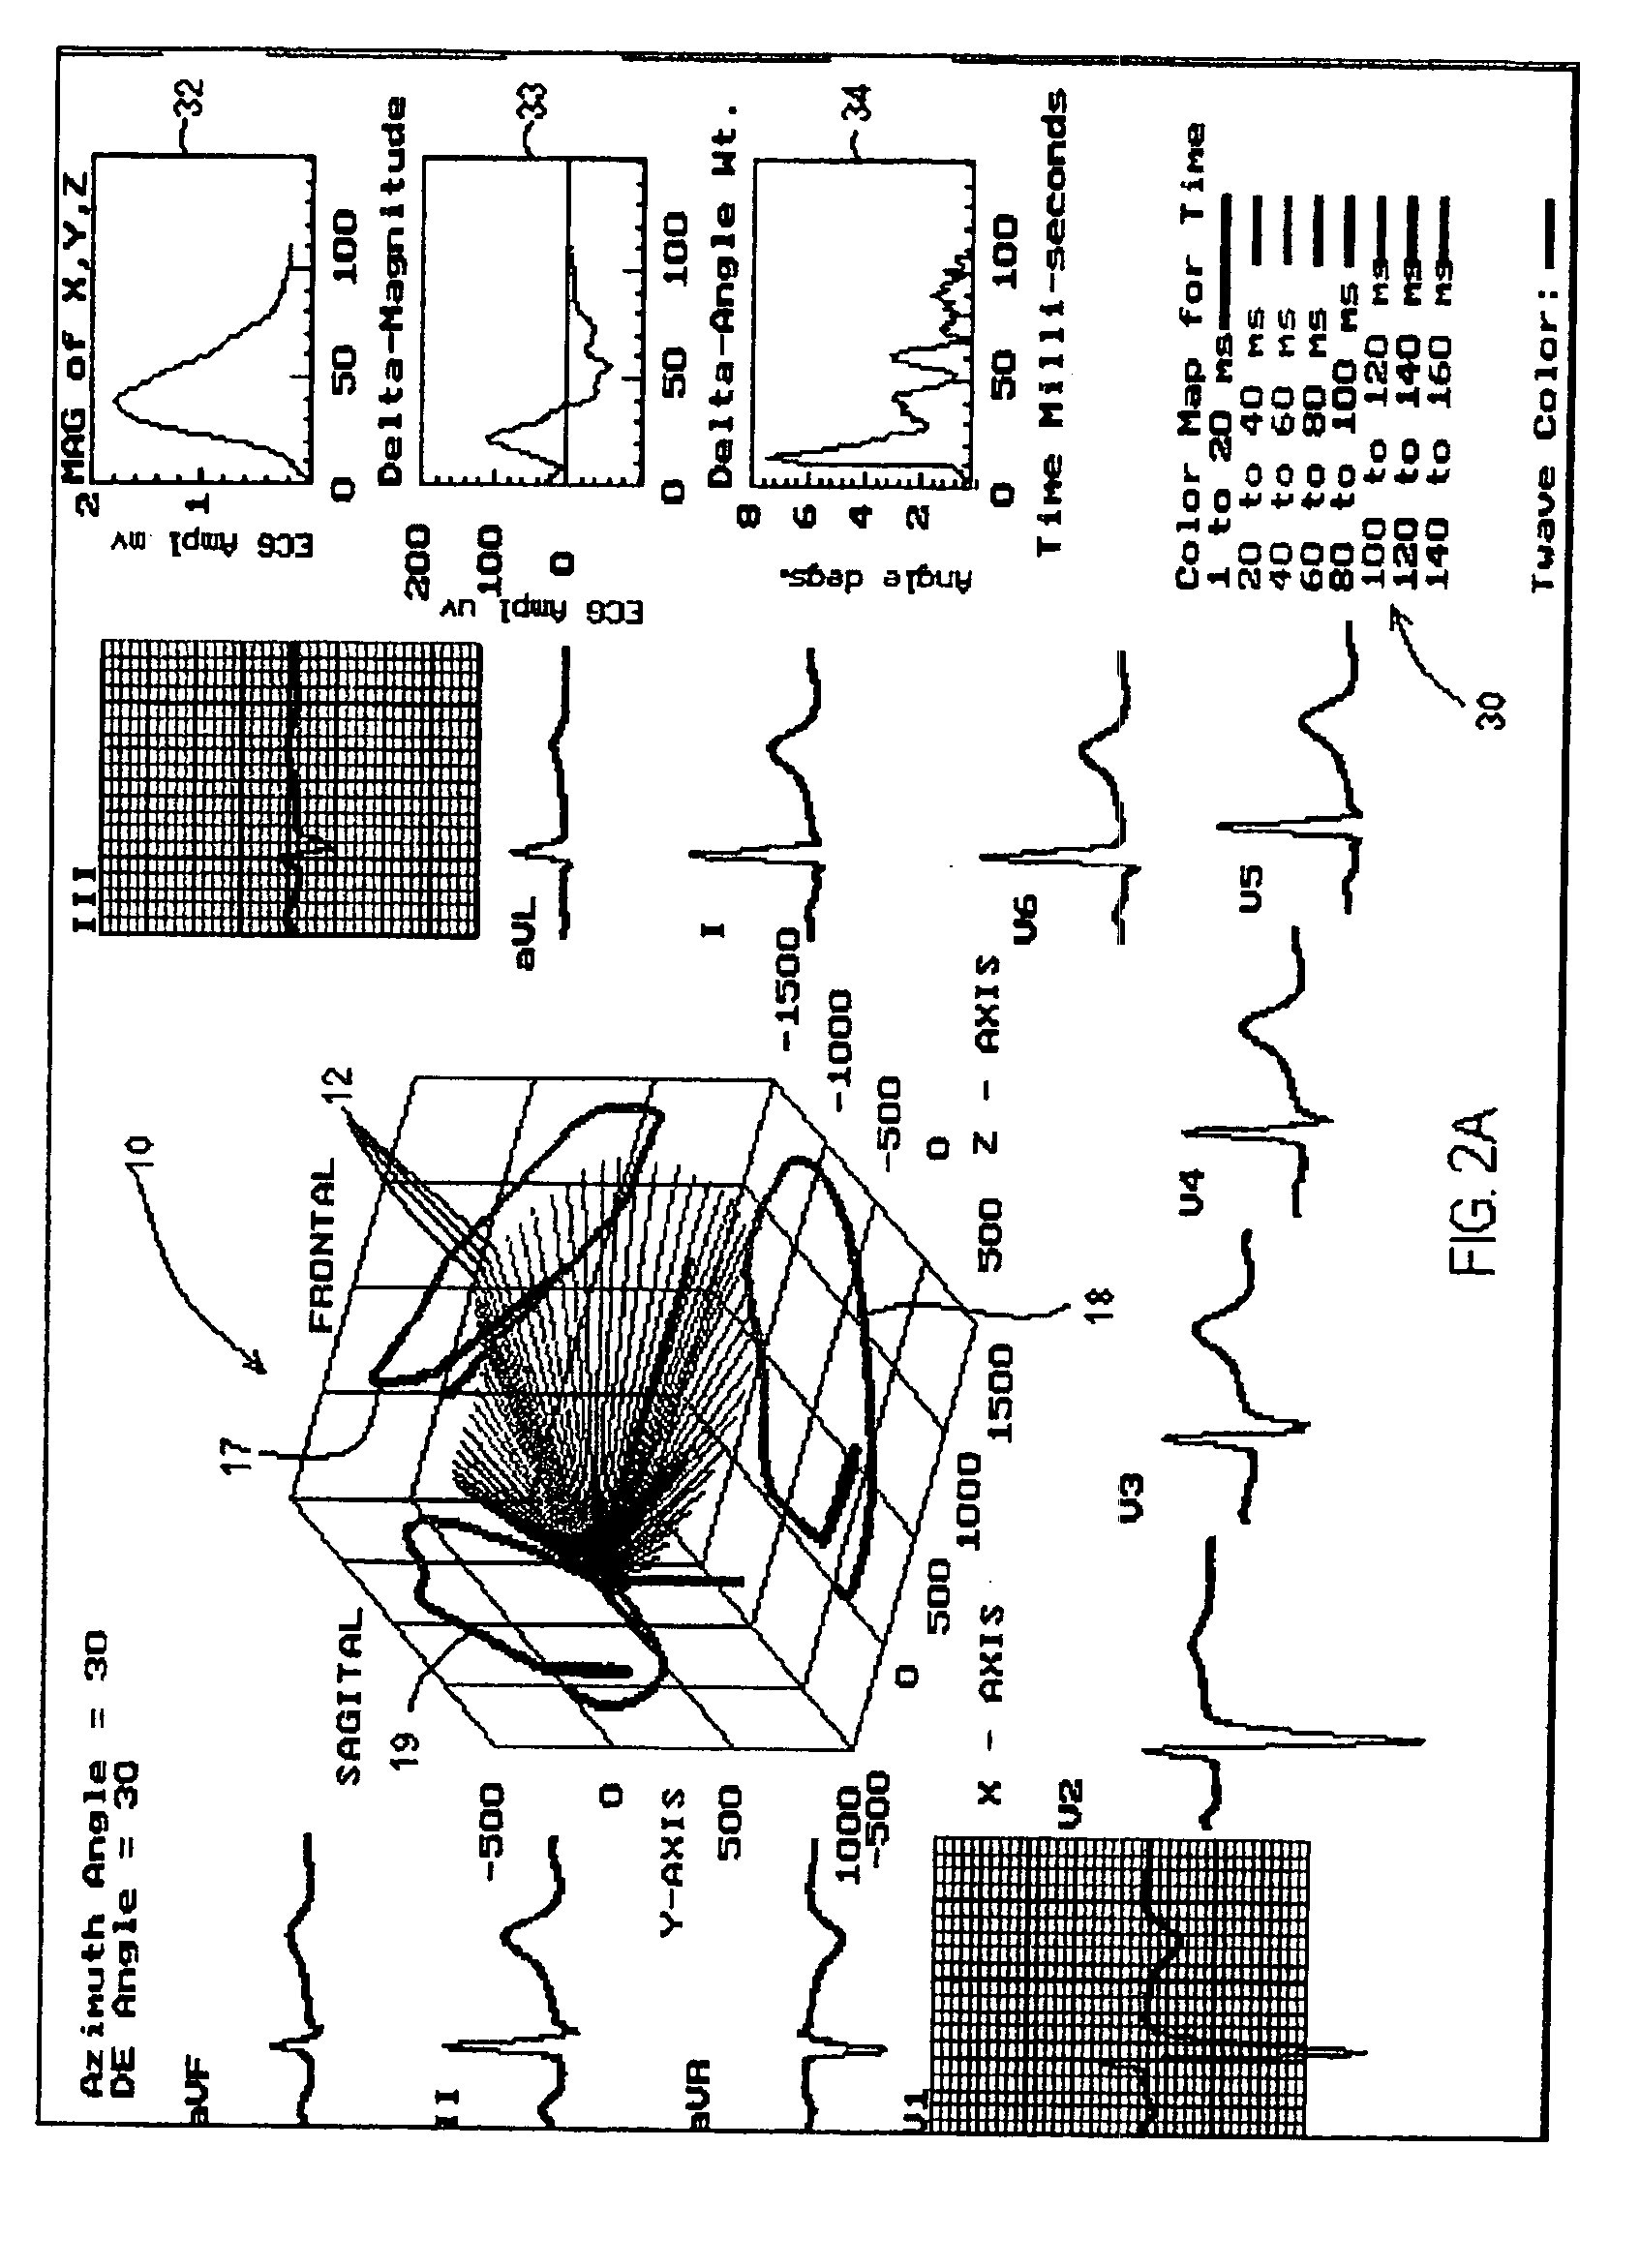 Three dimensional vector cardiograph and method for detecting and monitoring ischemic events